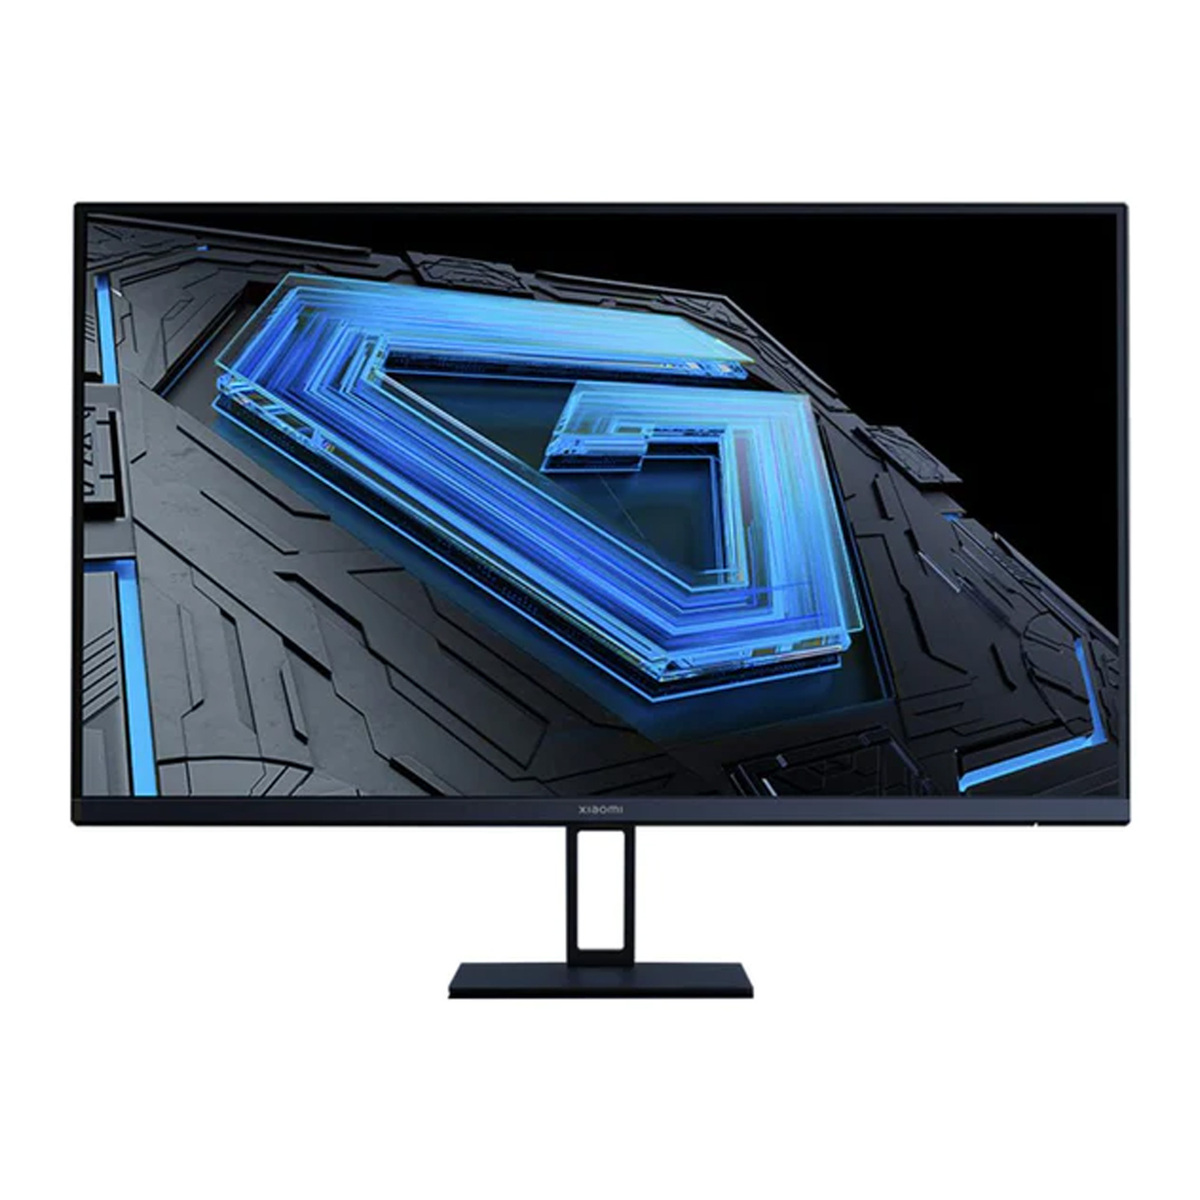 Mi G27i FHD IPS LCD Gaming Monitor, 27 inches, 165Hz Refresh Rate, ELA5379UK